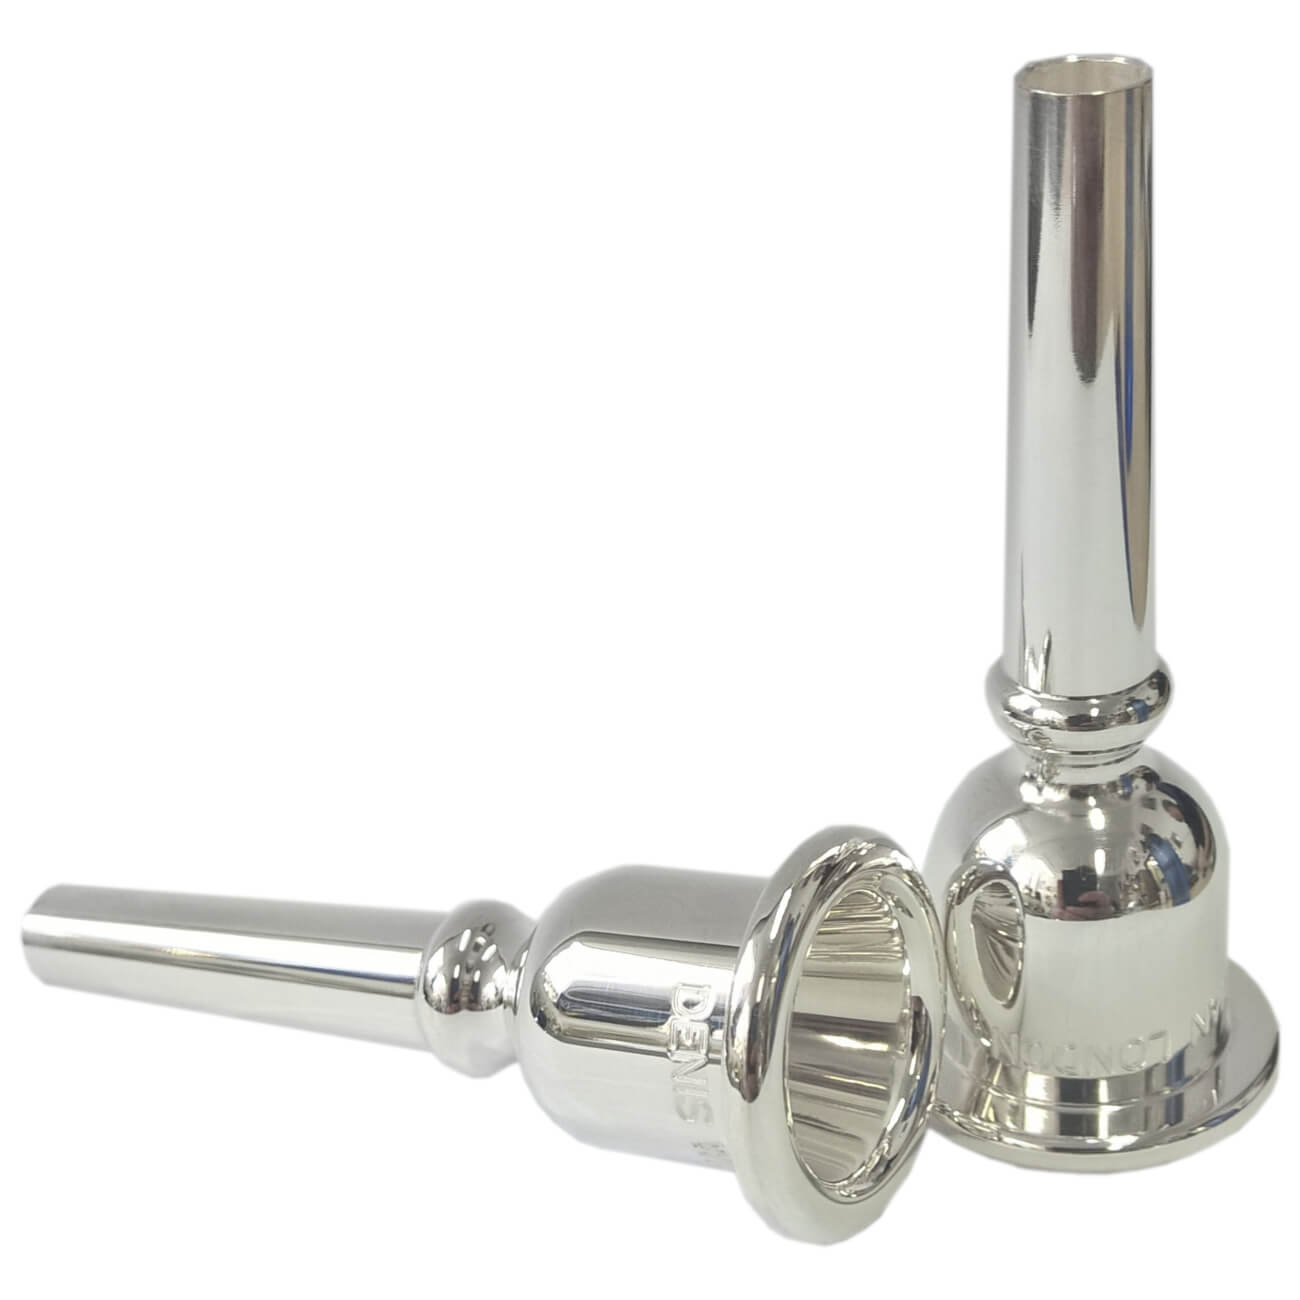 Paxman Online Store  Denis Wick/Paxman 7 French Horn Mouthpiece